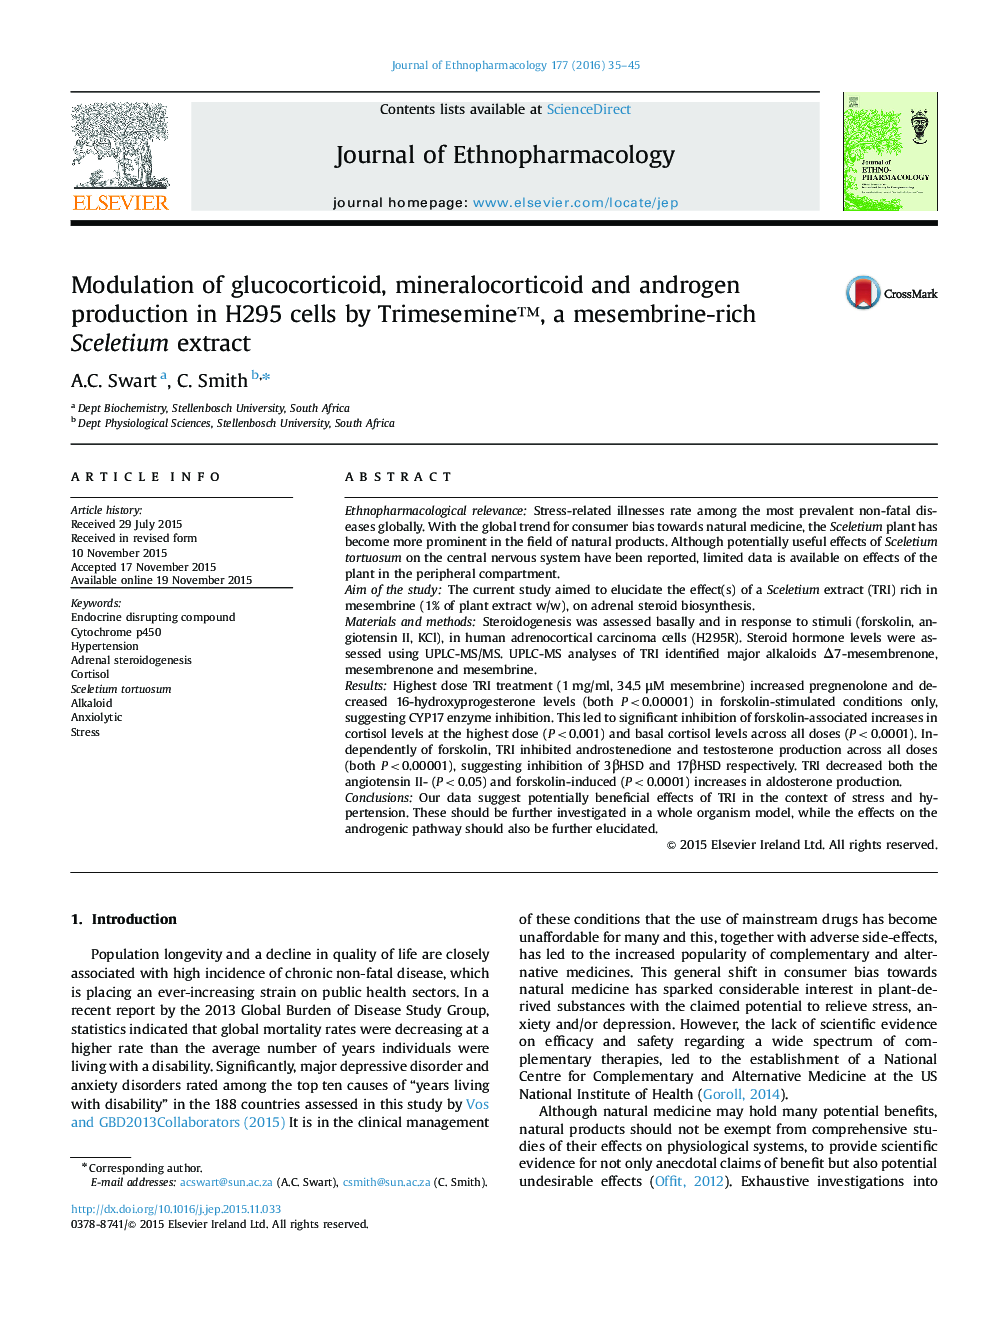 Modulation of glucocorticoid, mineralocorticoid and androgen production in H295 cells by Trimesemineâ¢, a mesembrine-rich Sceletium extract